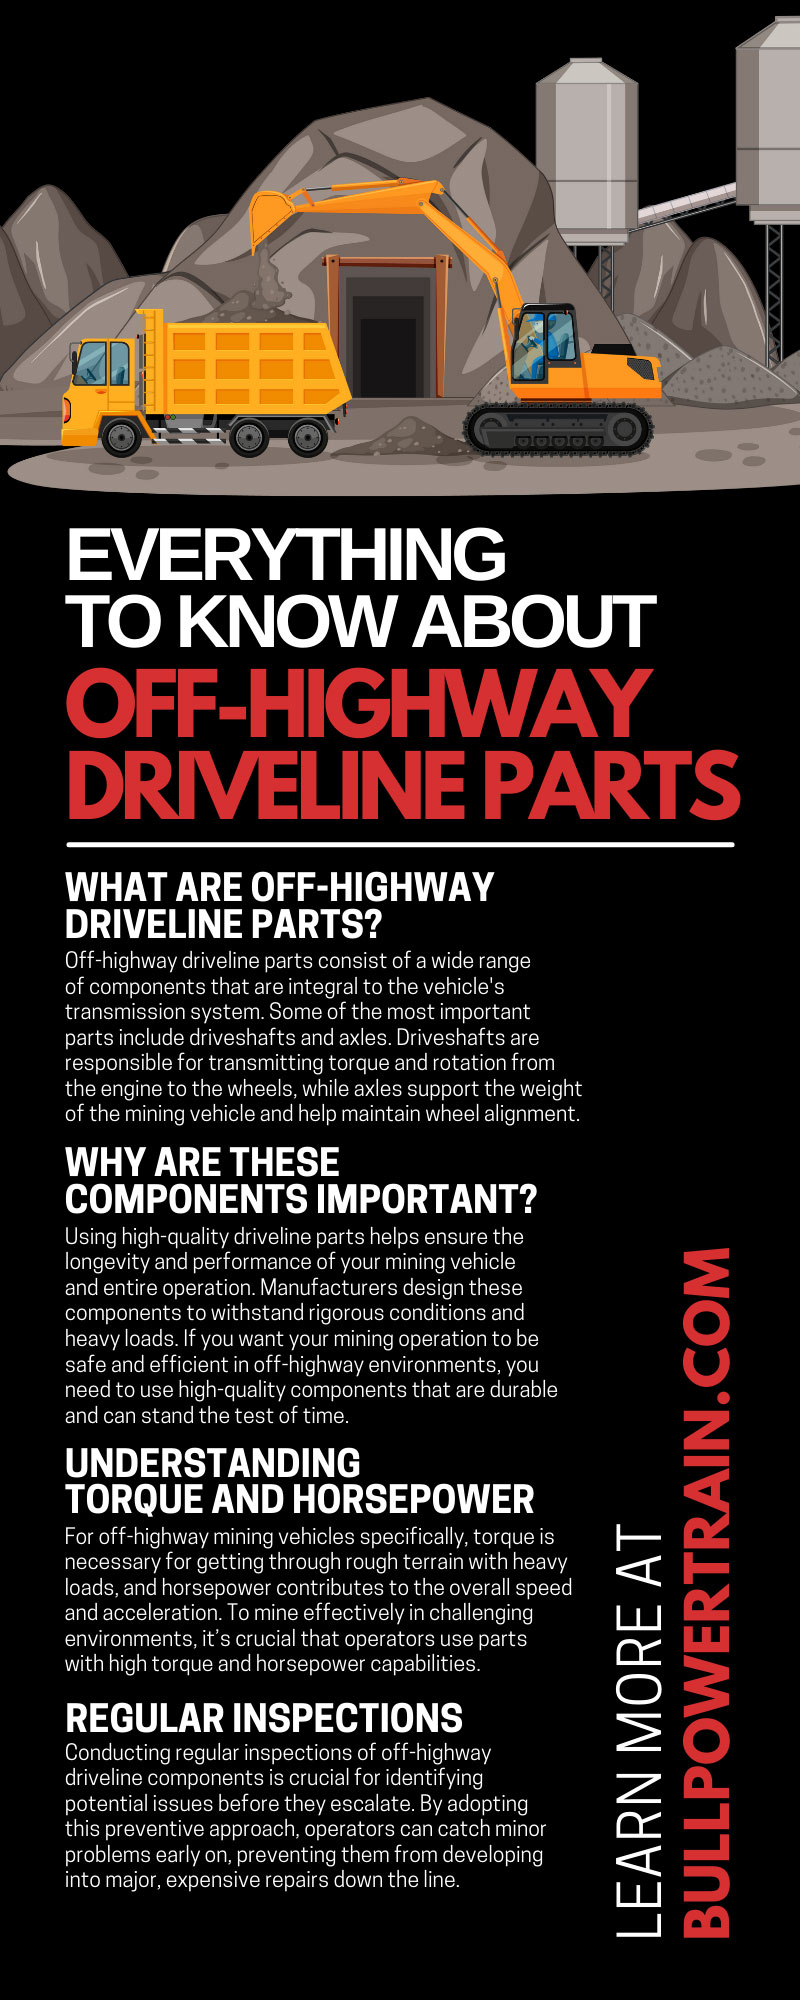 Everything To Know About Off-Highway Driveline Parts